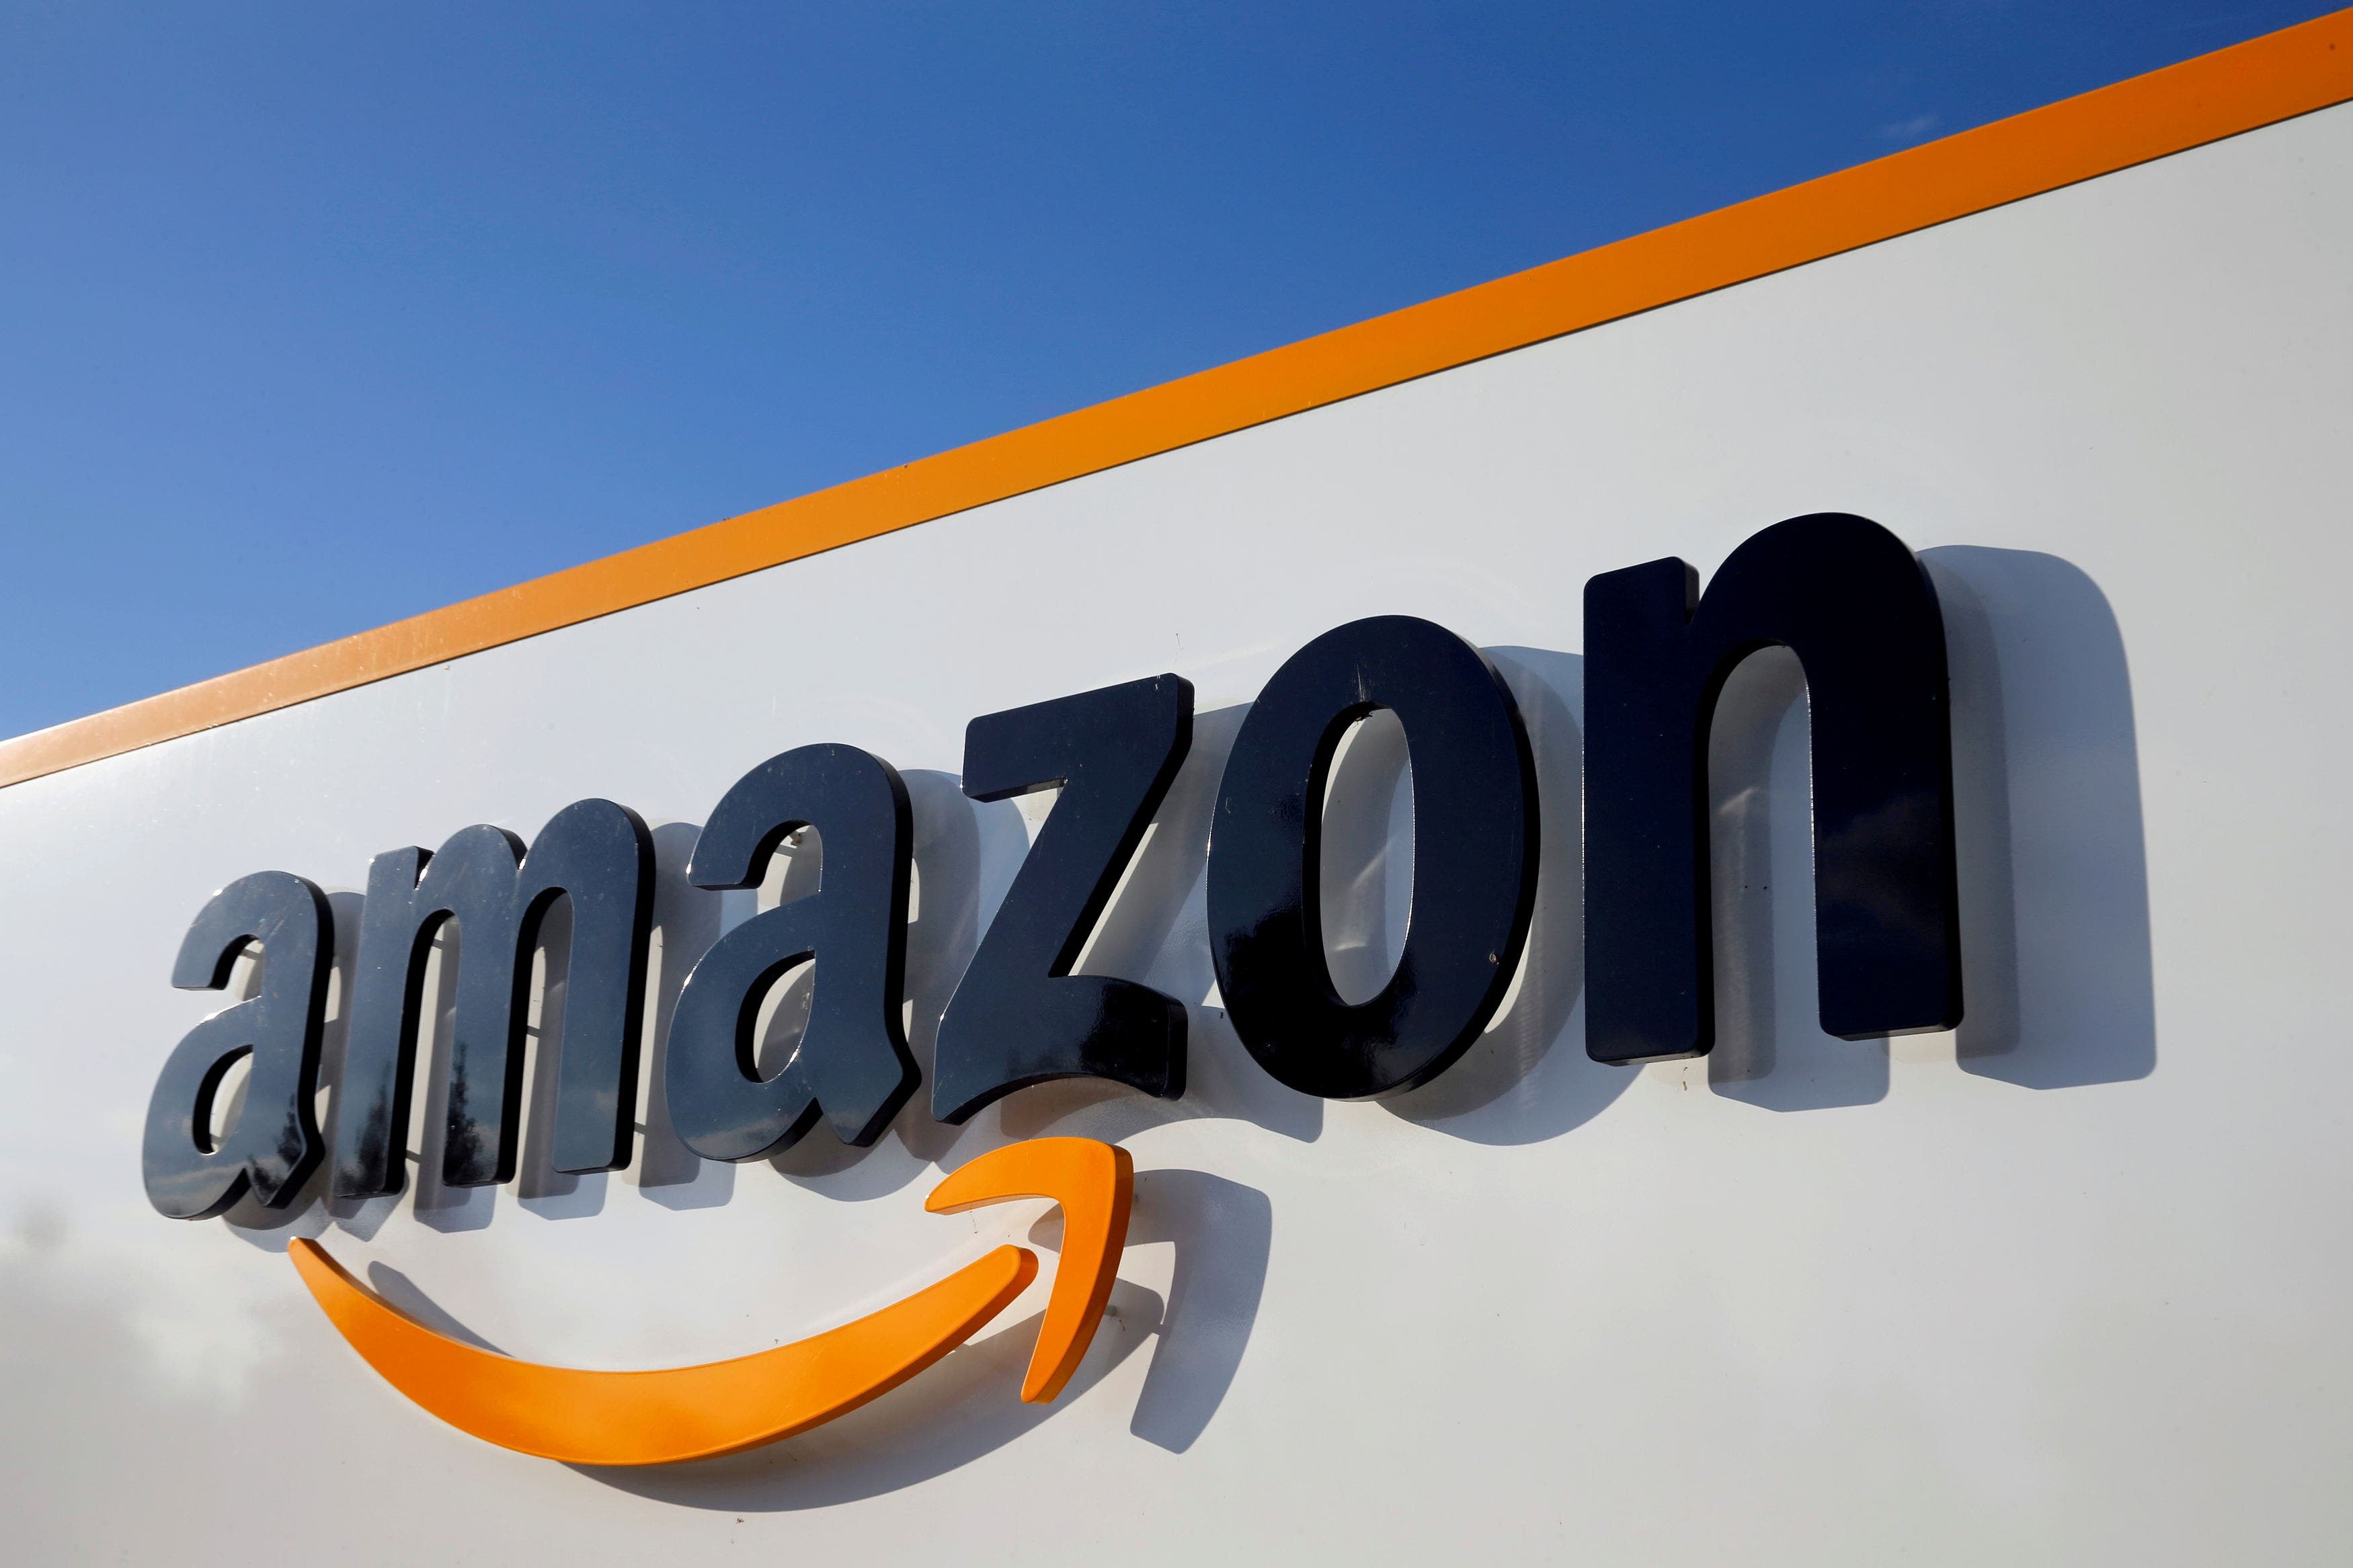 Amazon, Western Digital And Some Other Big Stocks Moving Higher In Thursday's Pre-Market Session